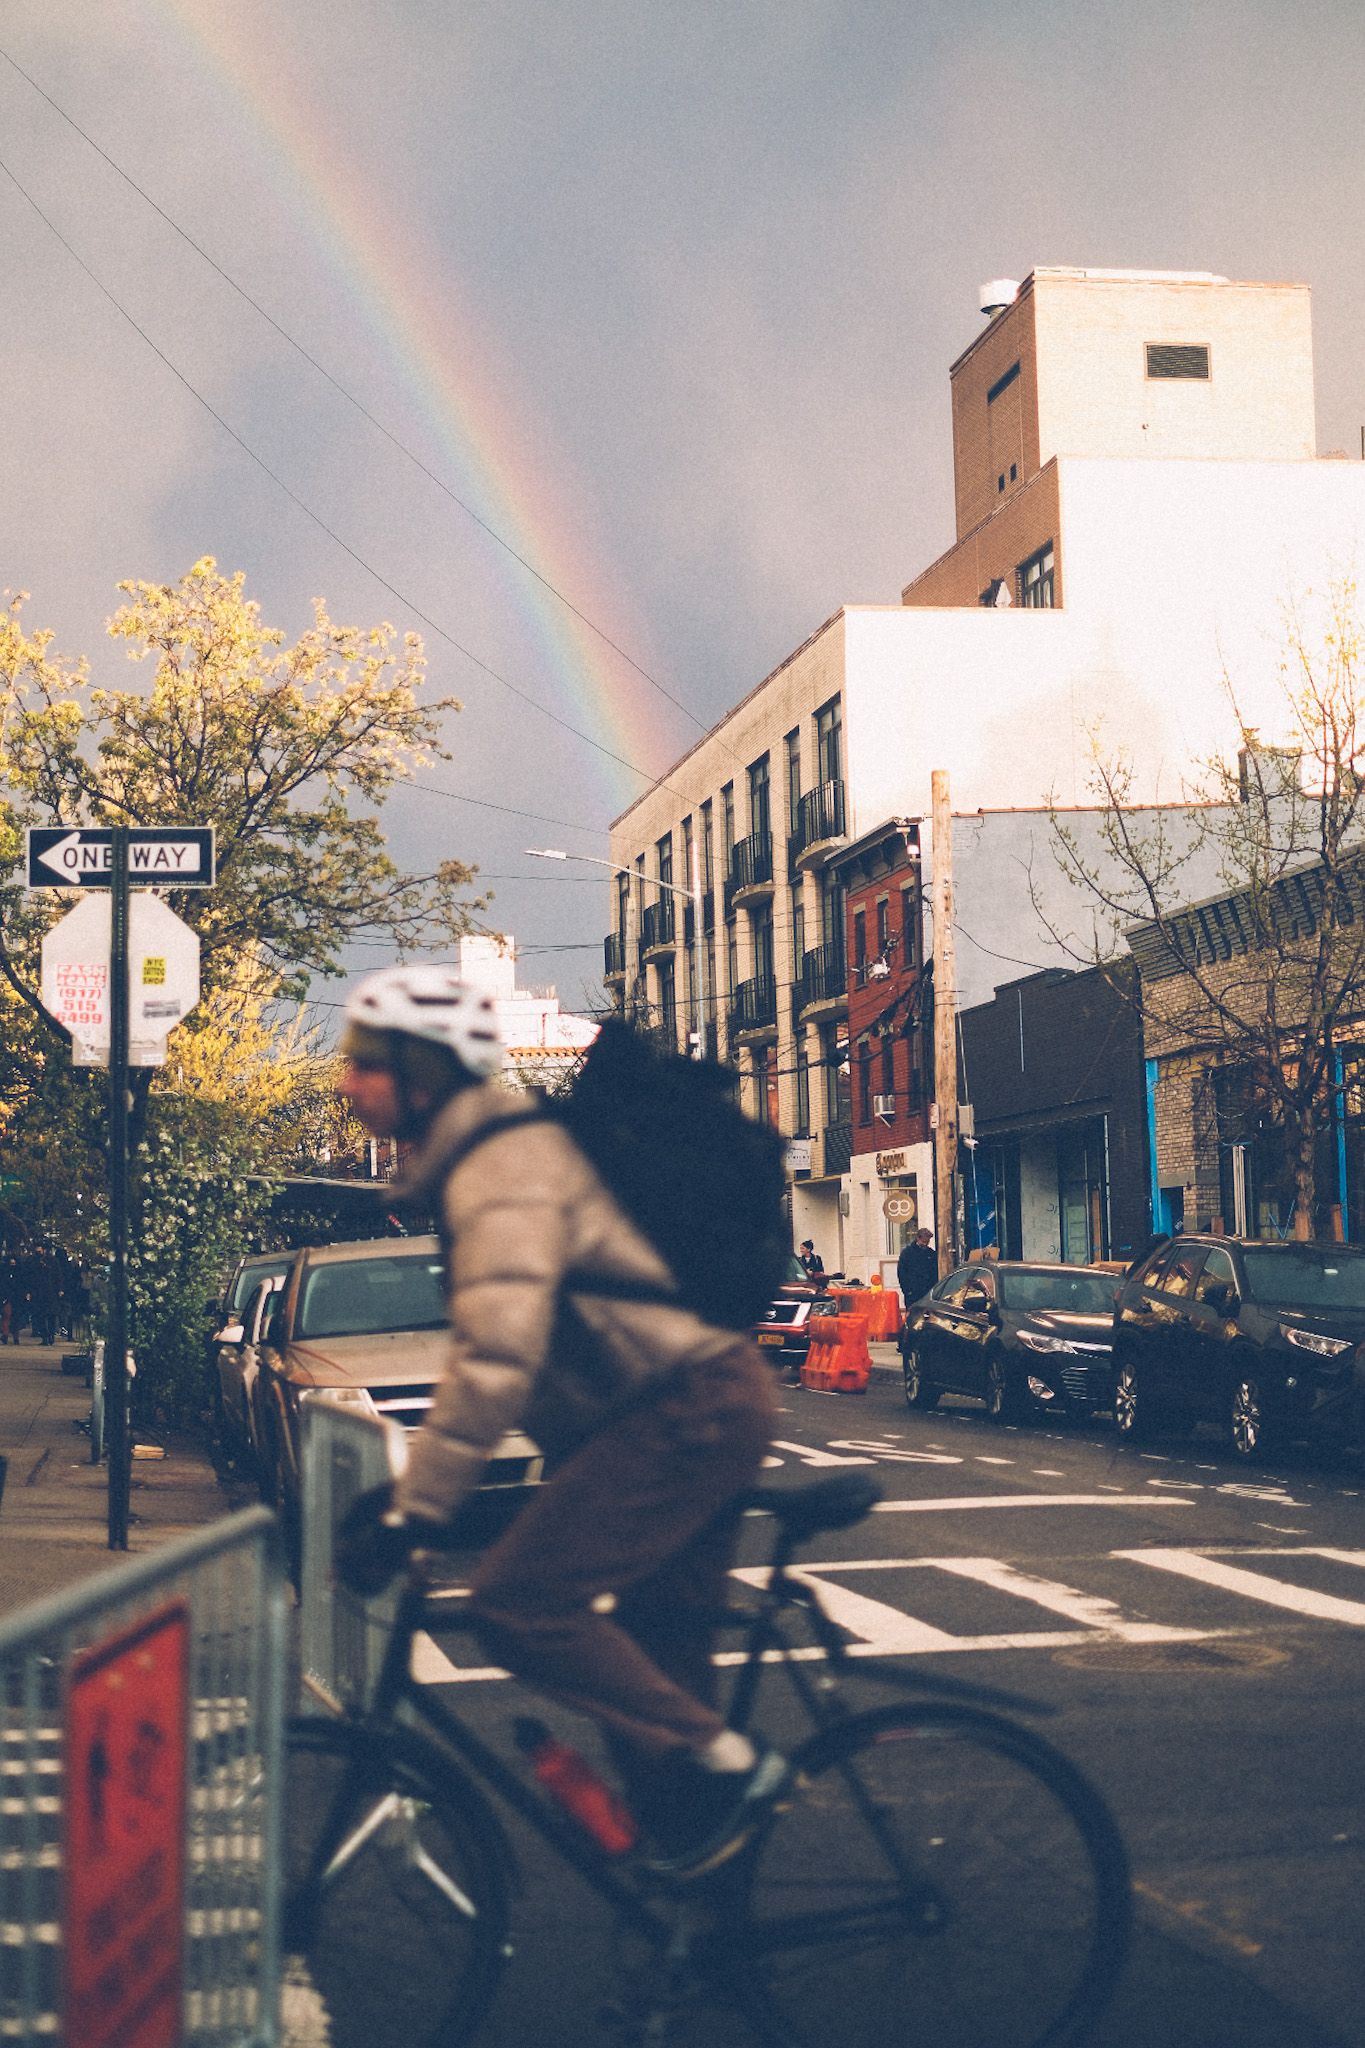 The sun sets in a gray sky on a street in Brooklyn, revealing the arch of a rainbow. In the foreground, out of focus, a man rides past on a bike.